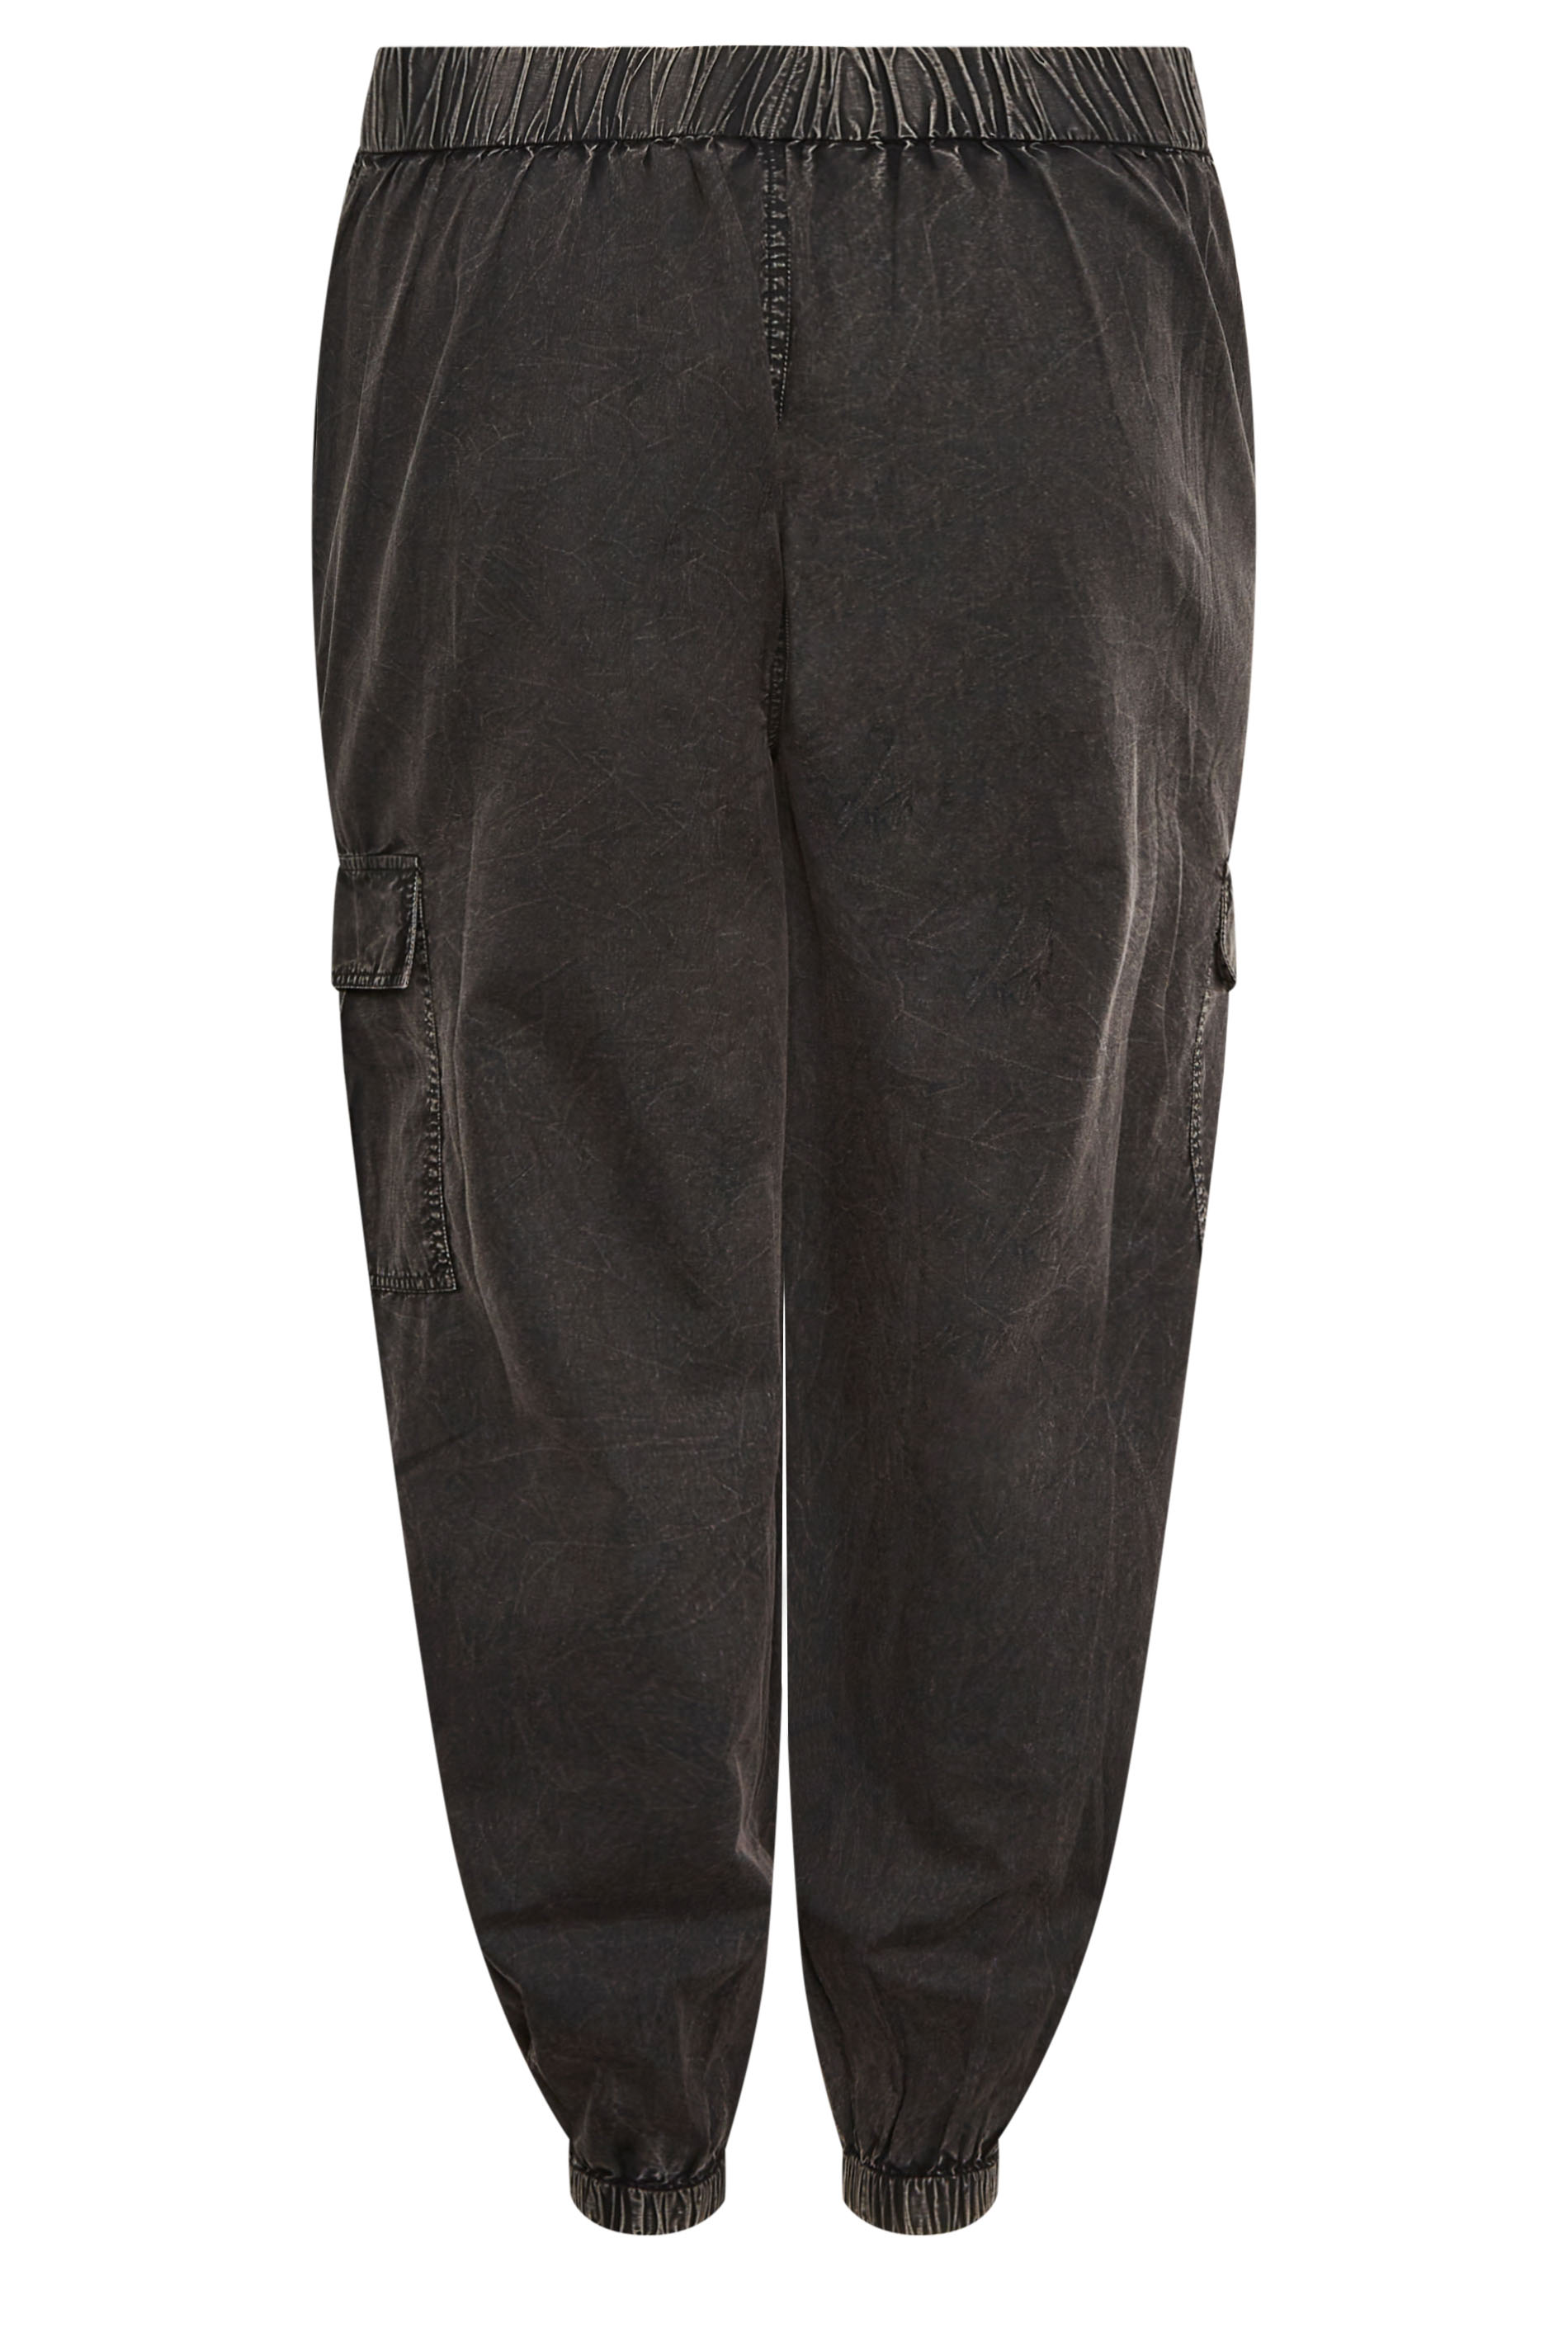 YOURS Curve Black Cuffed Cargo Trousers